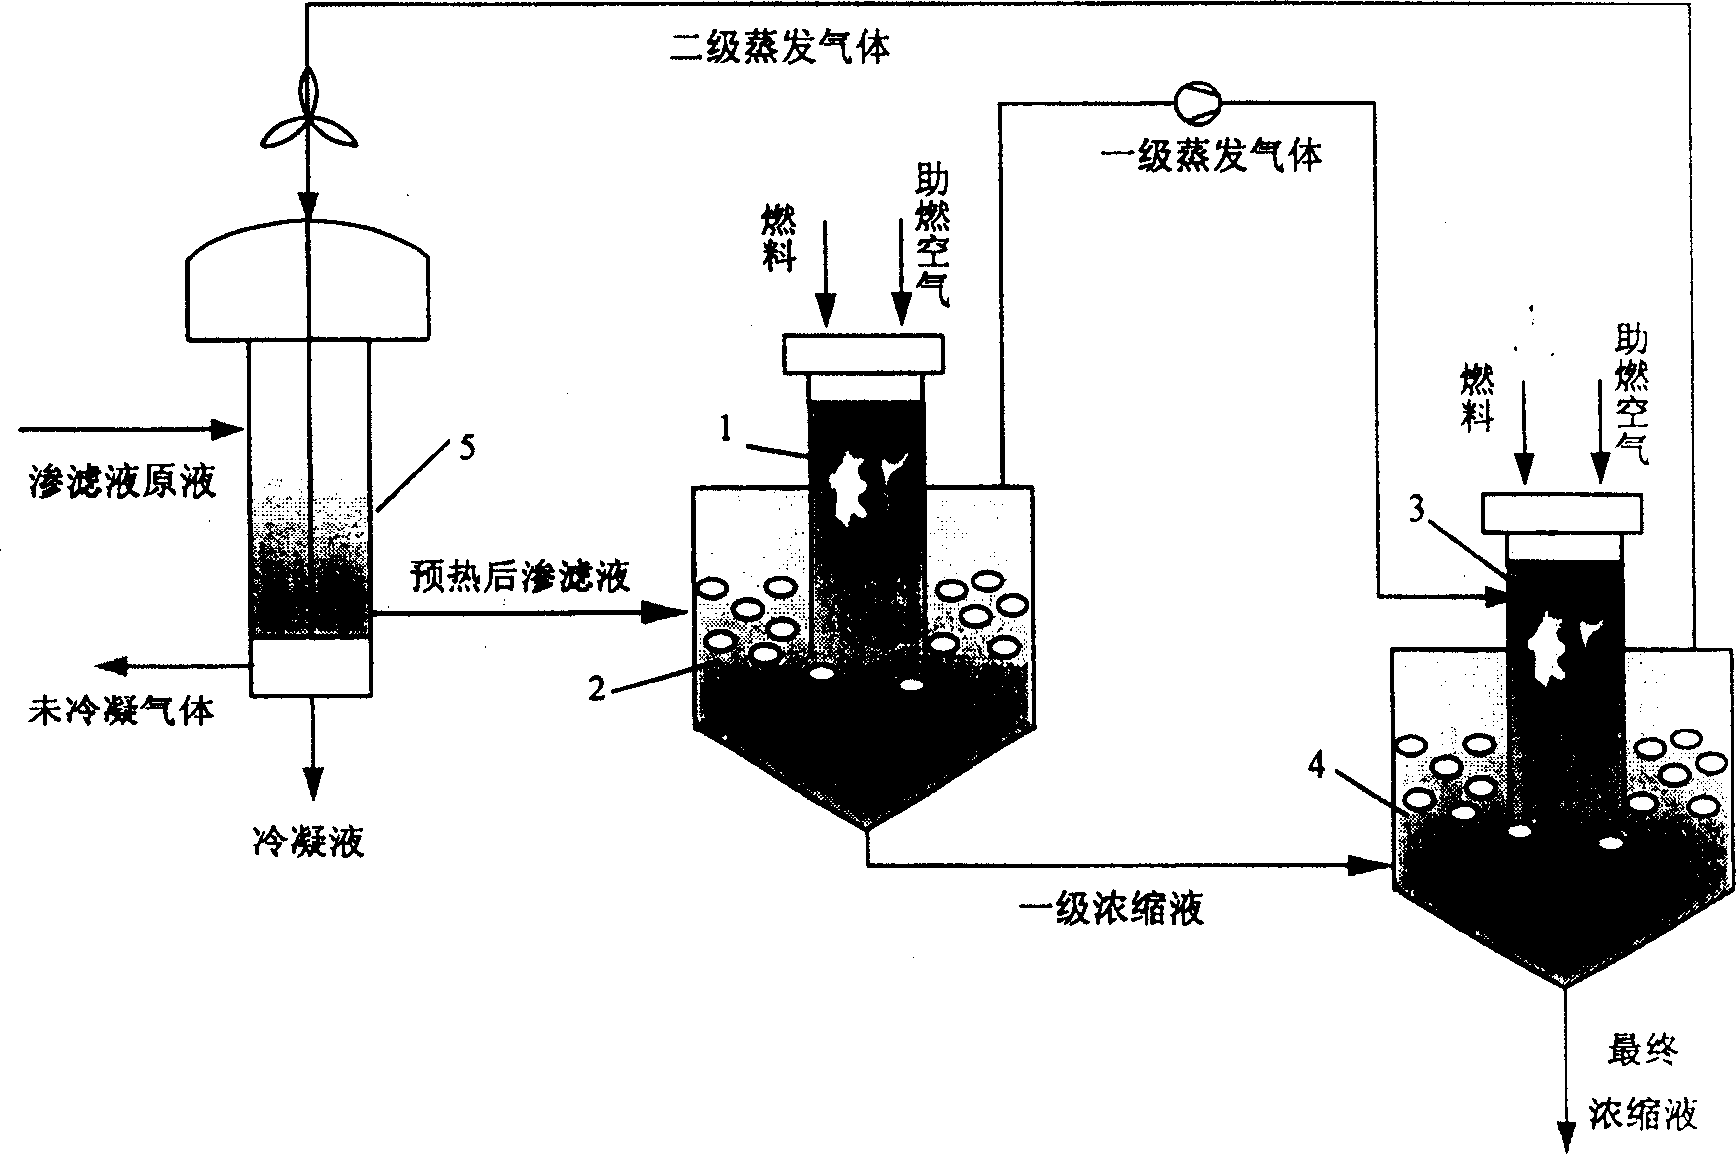 Two stage treatment method for distillation concentration and incineration of diffusion liquid from refuse burying site